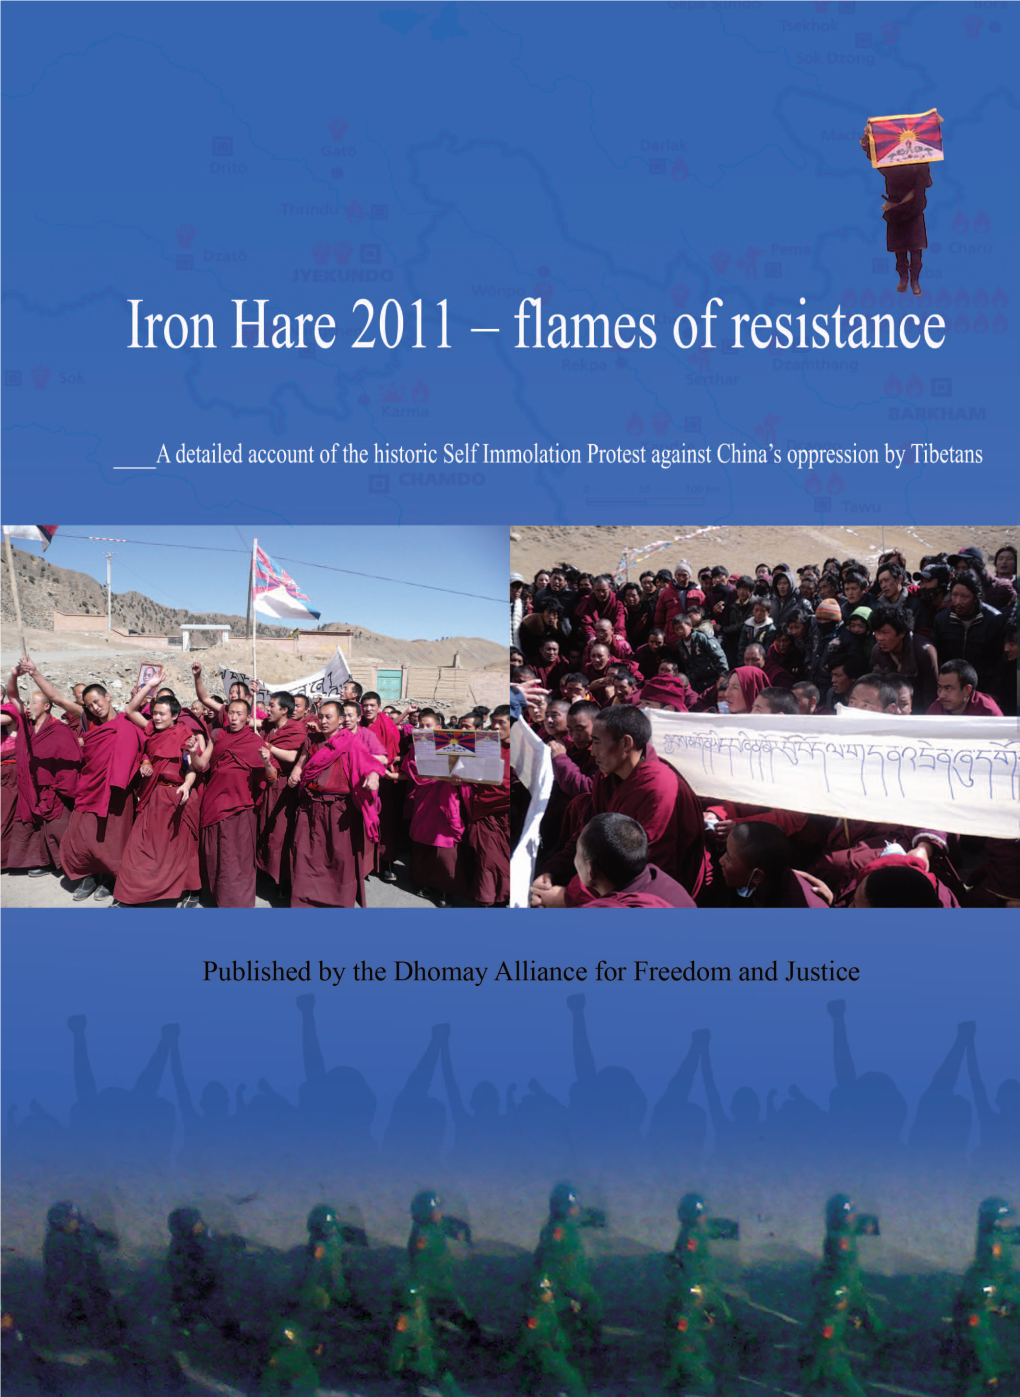 Iron Hare 2011: Flames of Resistance